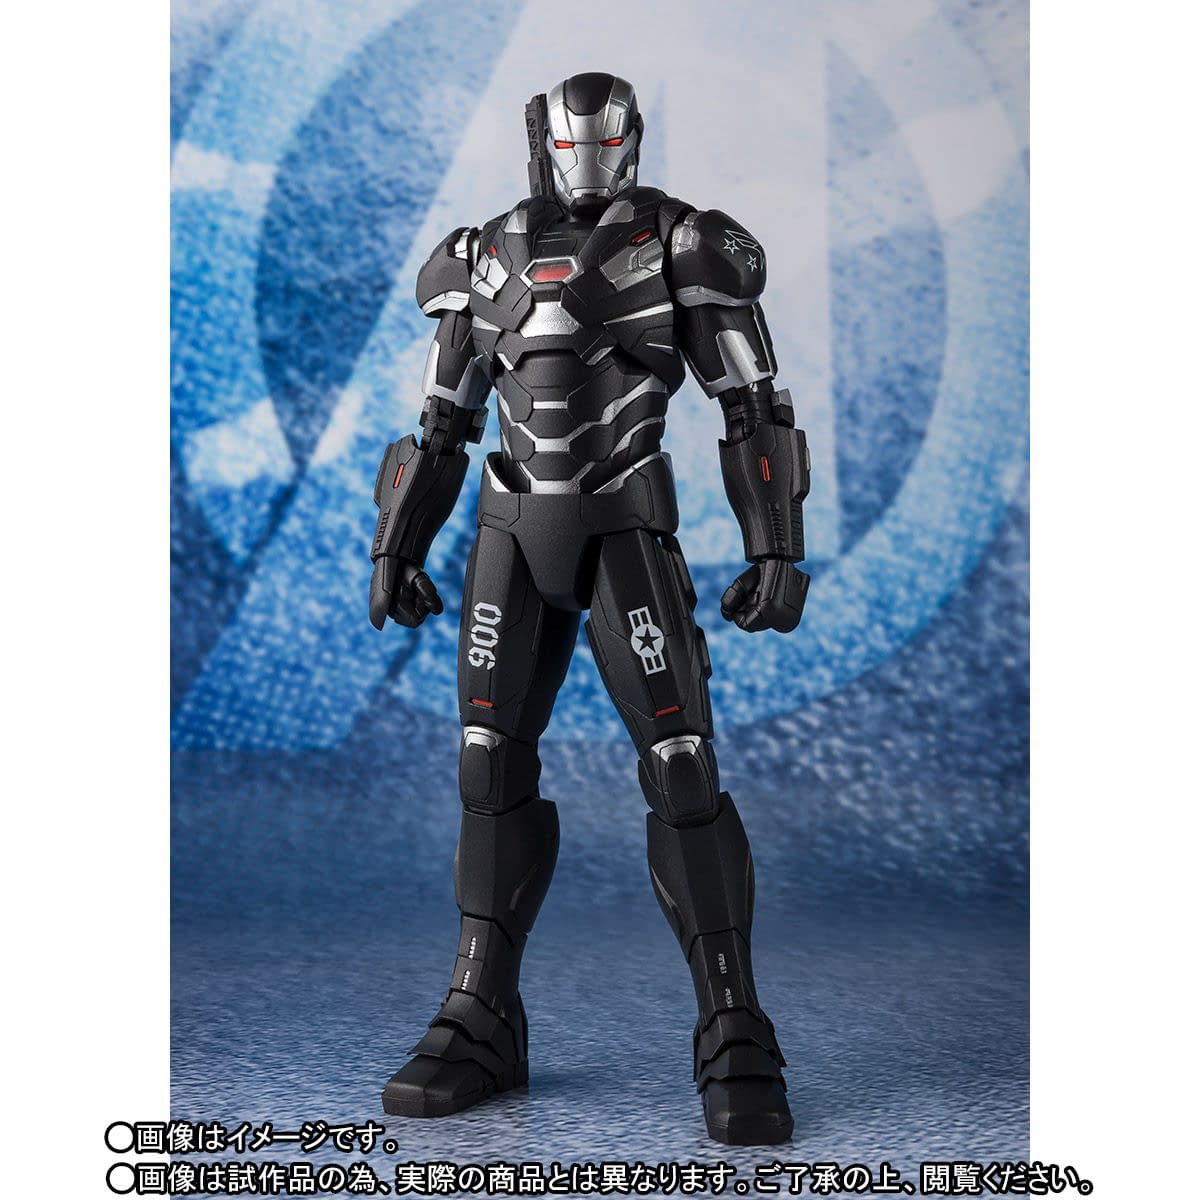 War Machine Joins the "Endgame" with New S.H Figuarts Figure